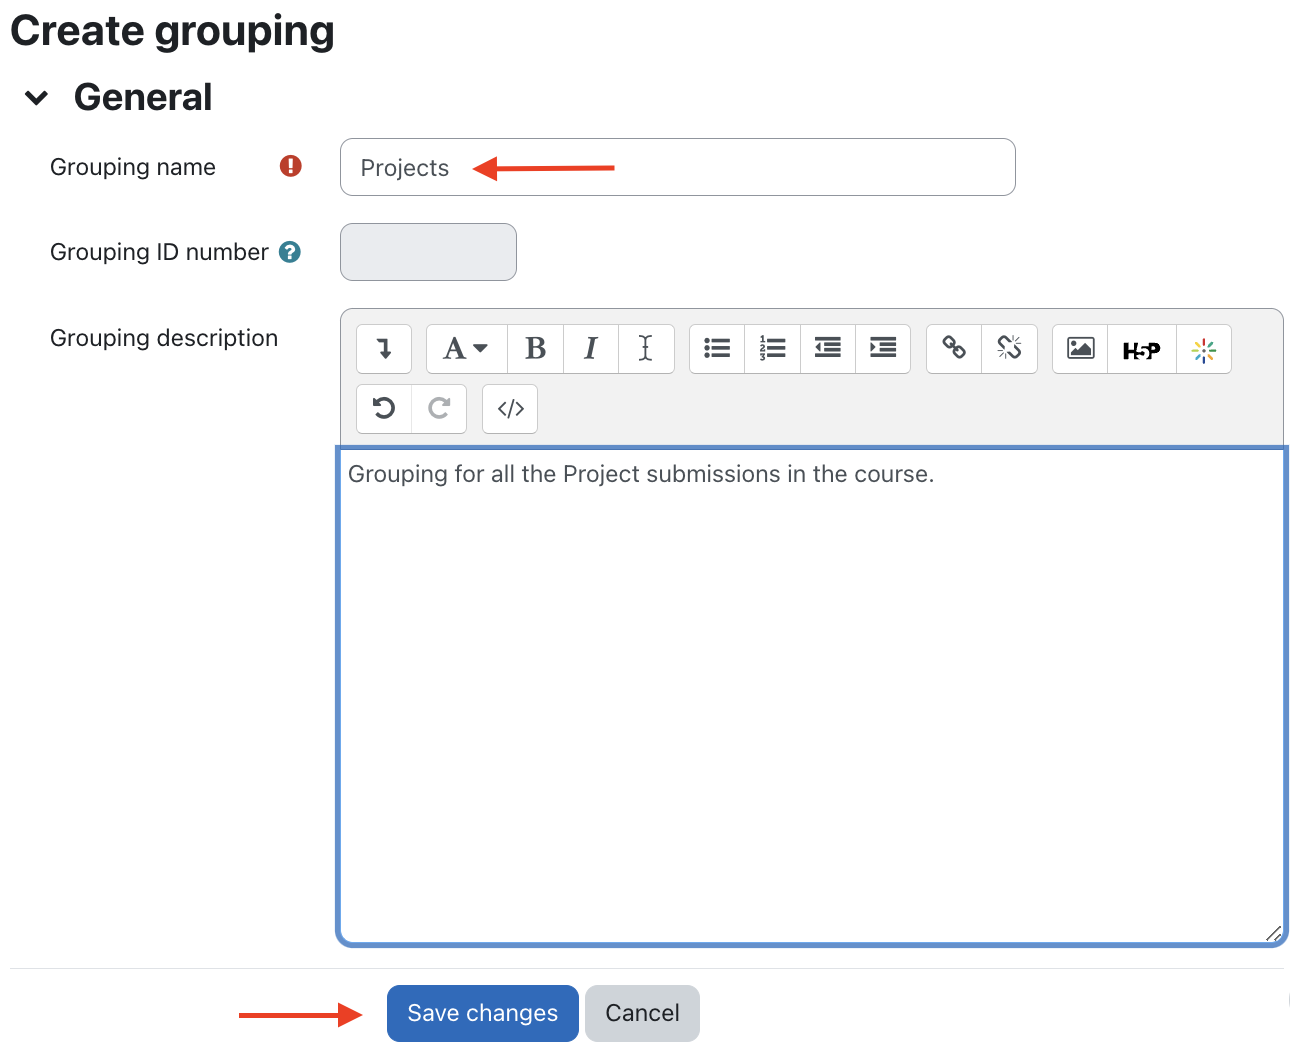 Provide grouping name and click save changes